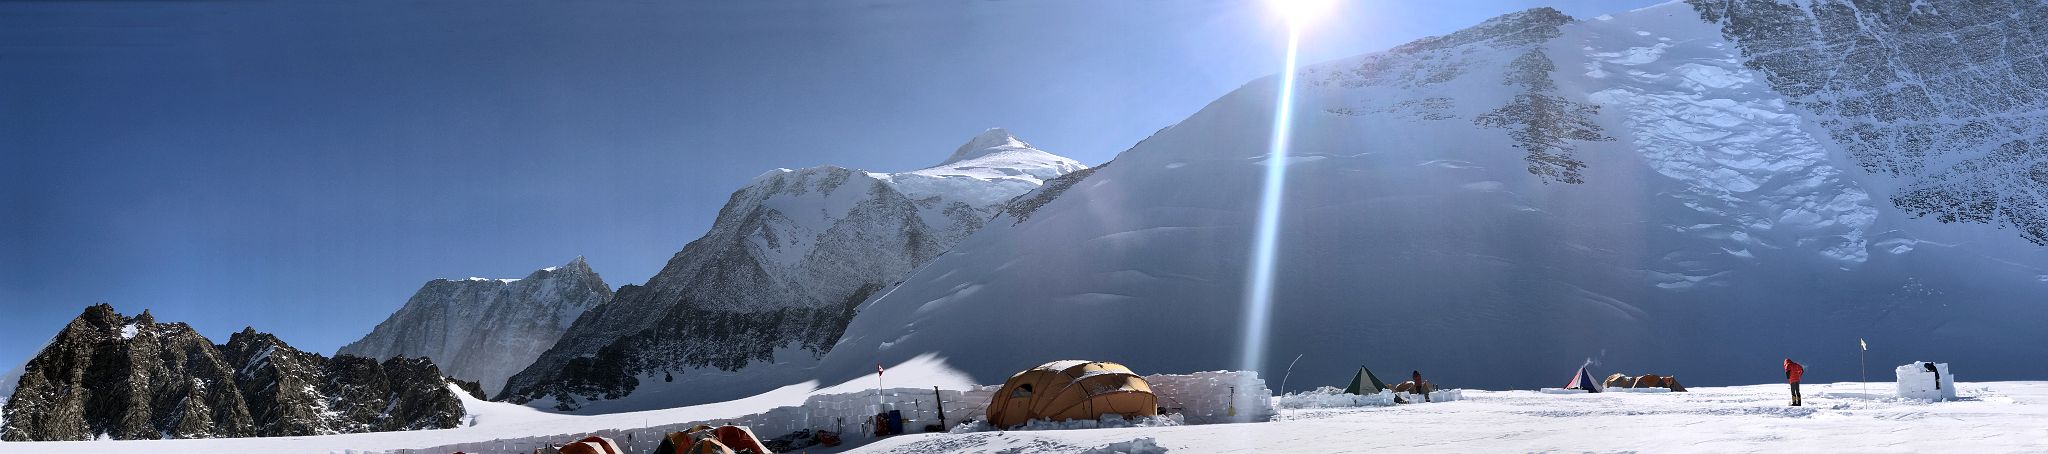 02A Panoramic View Of Mount Epperly, Mount Shinn, The Ridge Of Branscomb Peak And The Tents Of Mount Vinson Low Camp